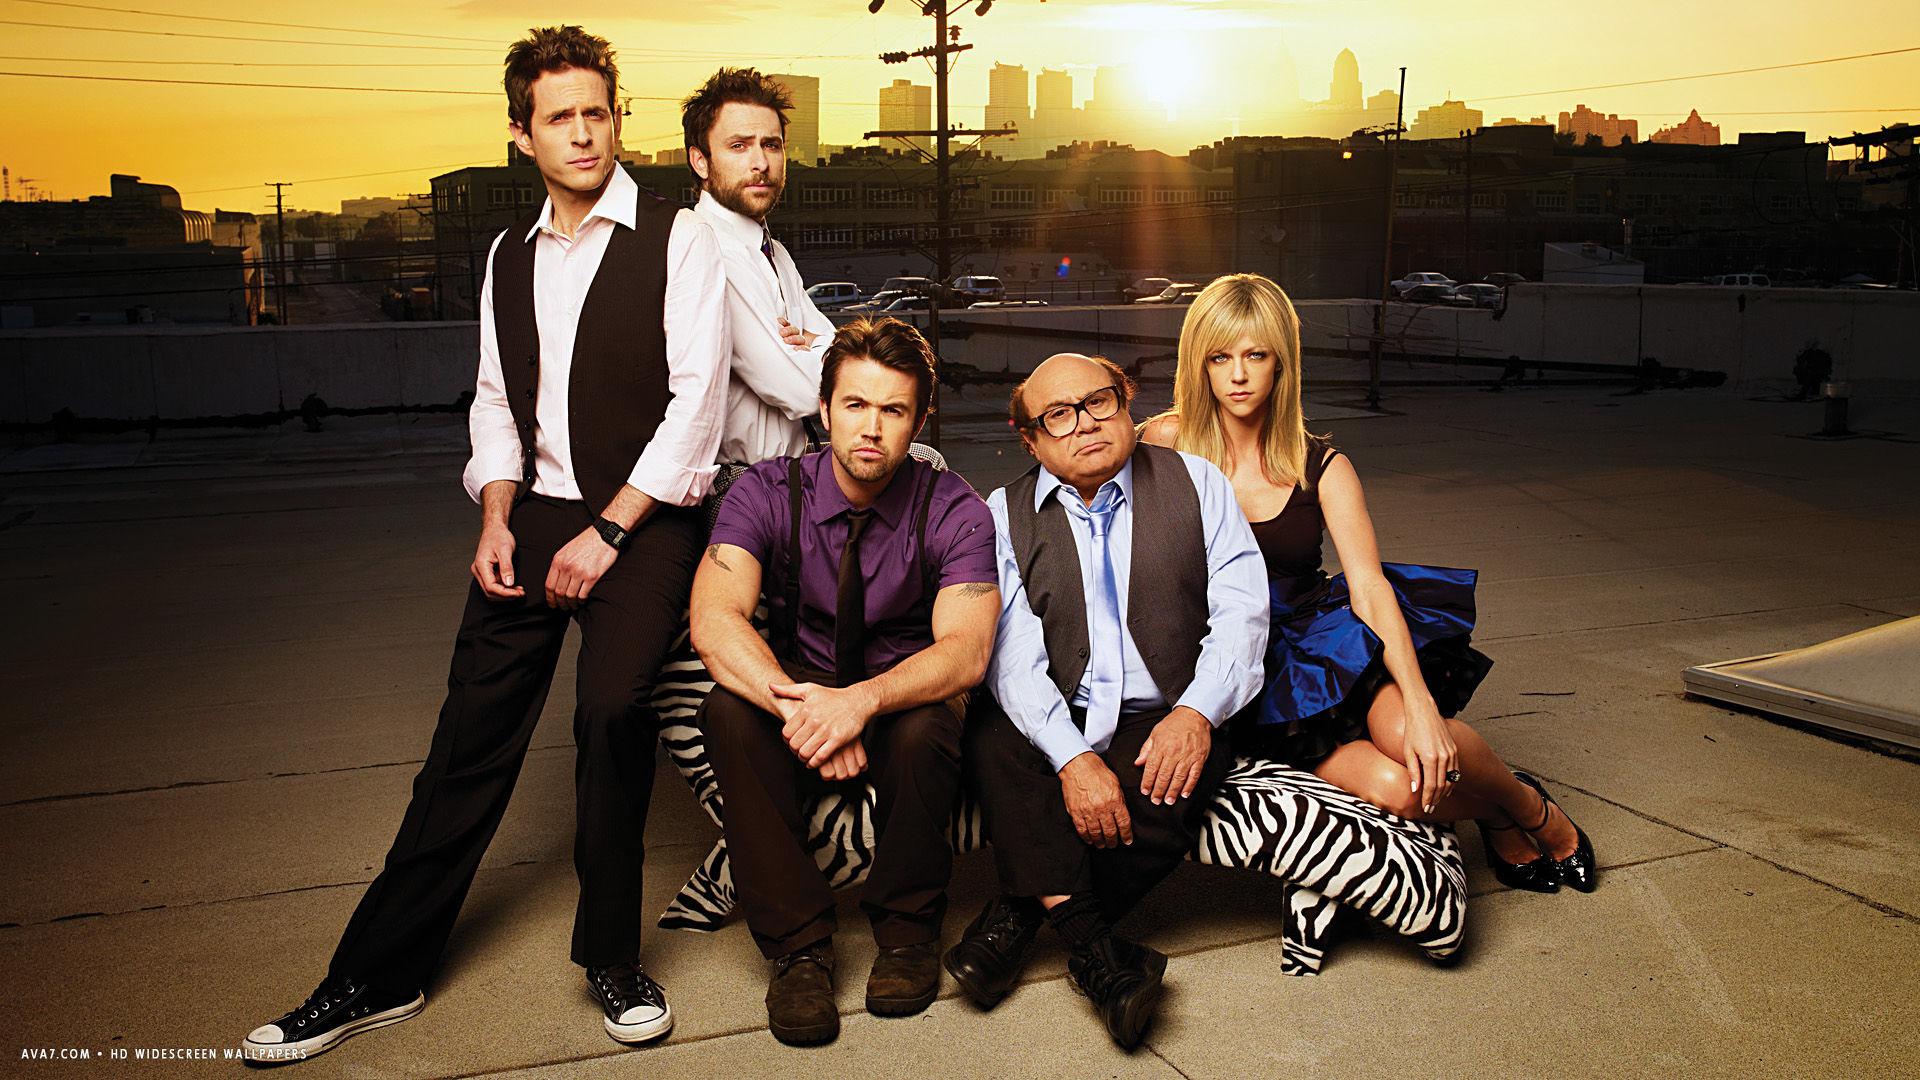 Its Always Sunny Wallpaper background picture